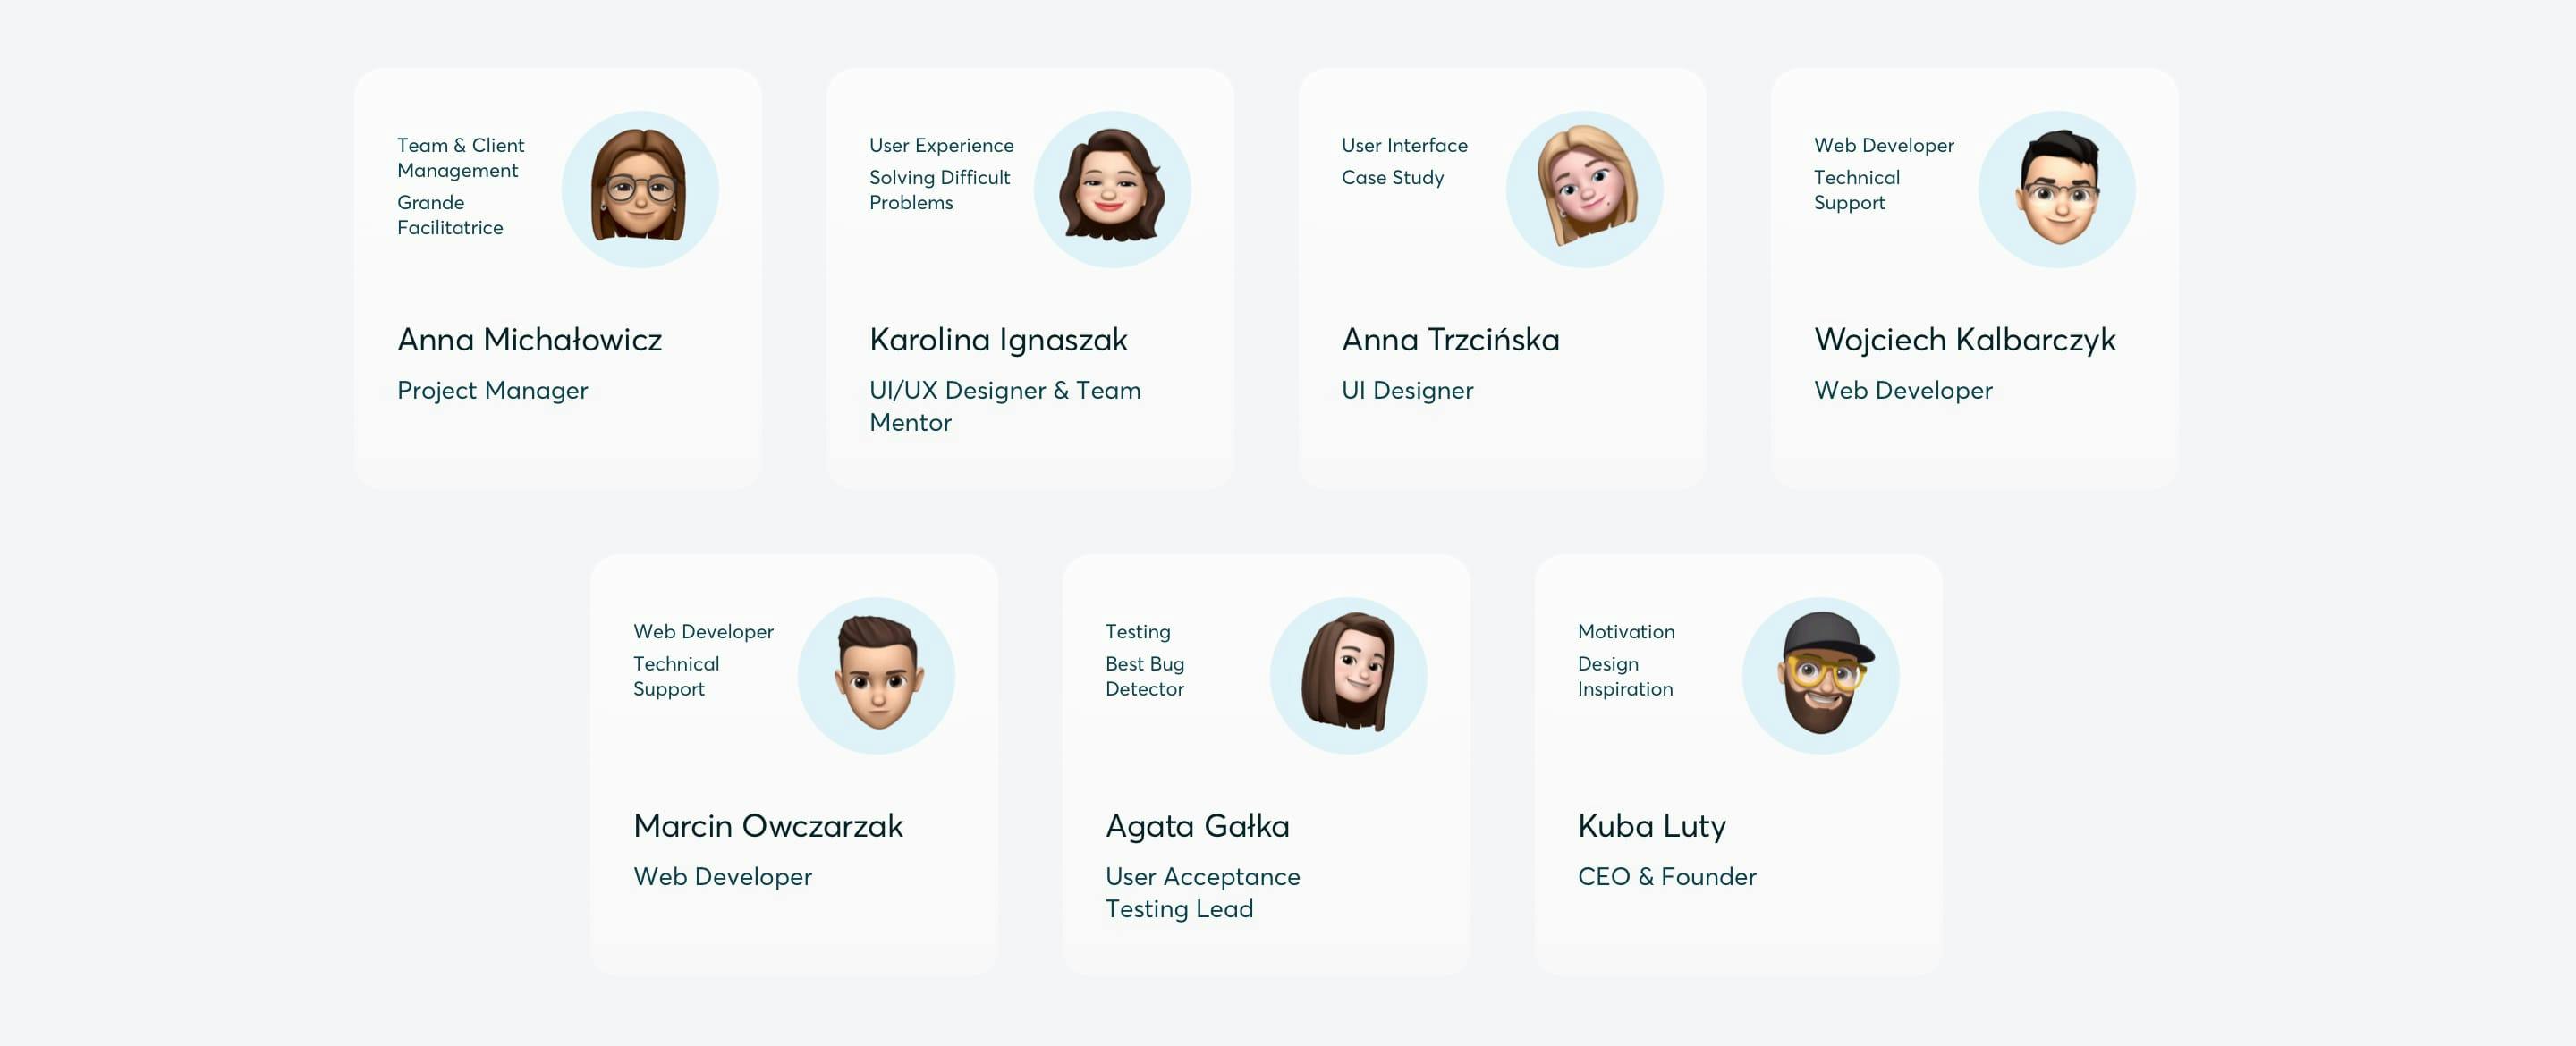 Adchitects project team, Project Manager, UX/UI Designer, UI Designer, Web Developer, Web Developer, User Acceptance and Testing Lead, CEO & Founder